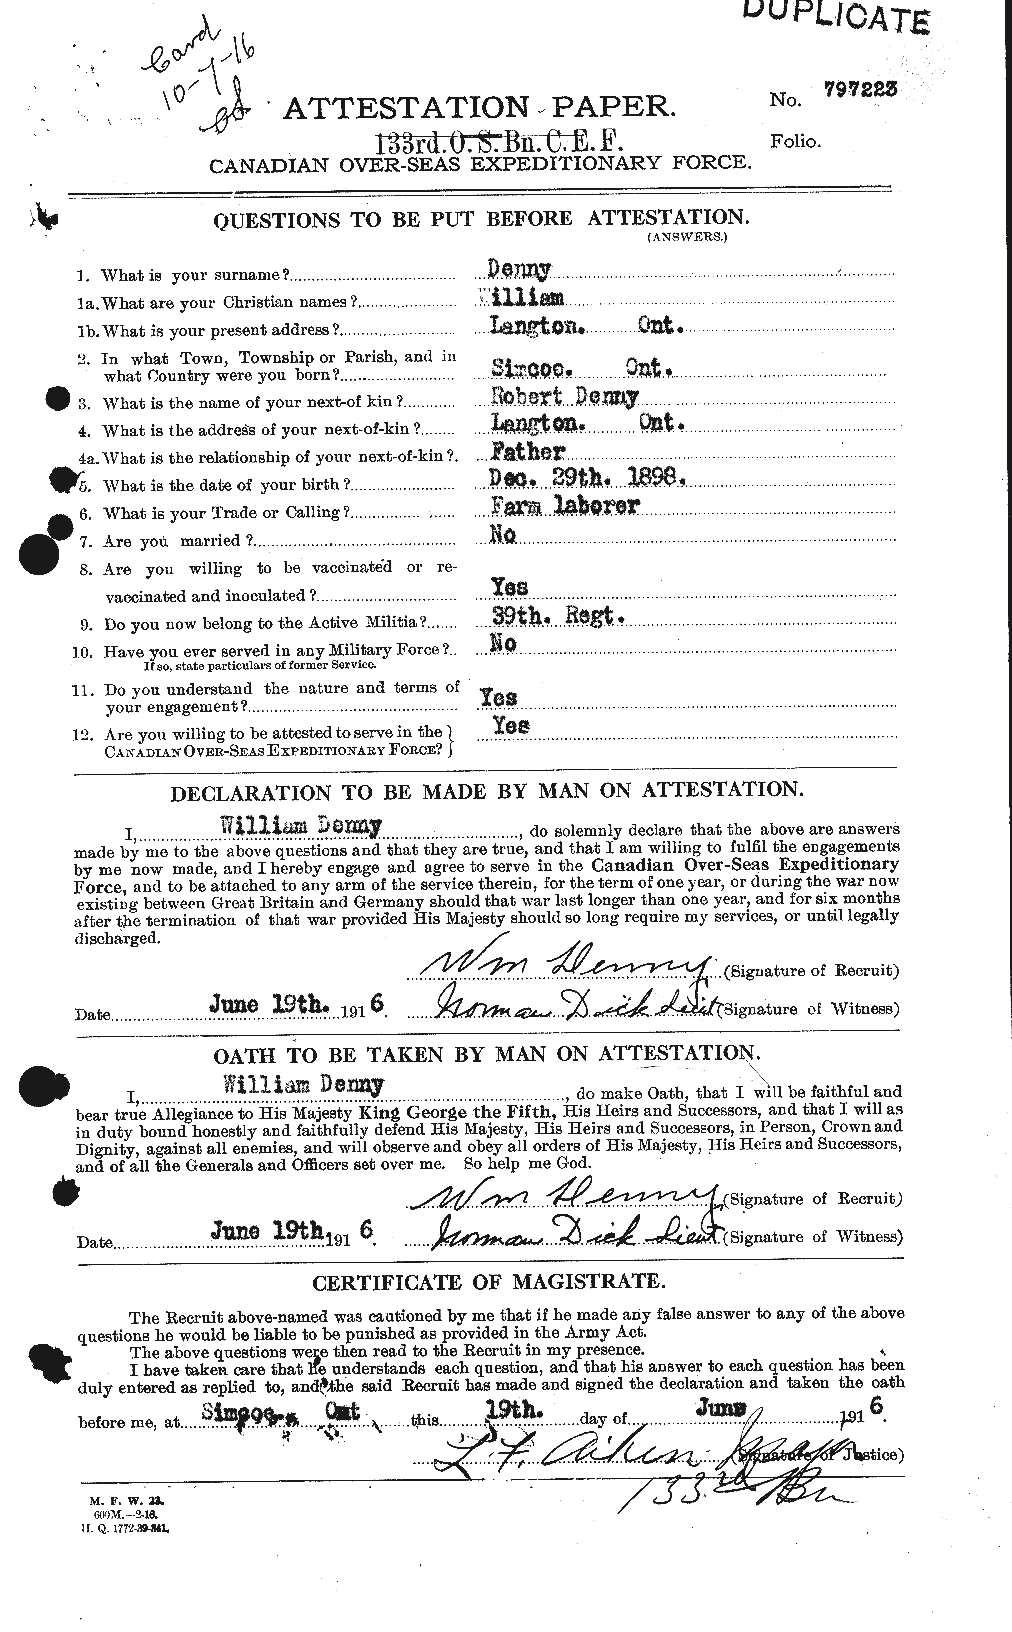 Personnel Records of the First World War - CEF 286377a